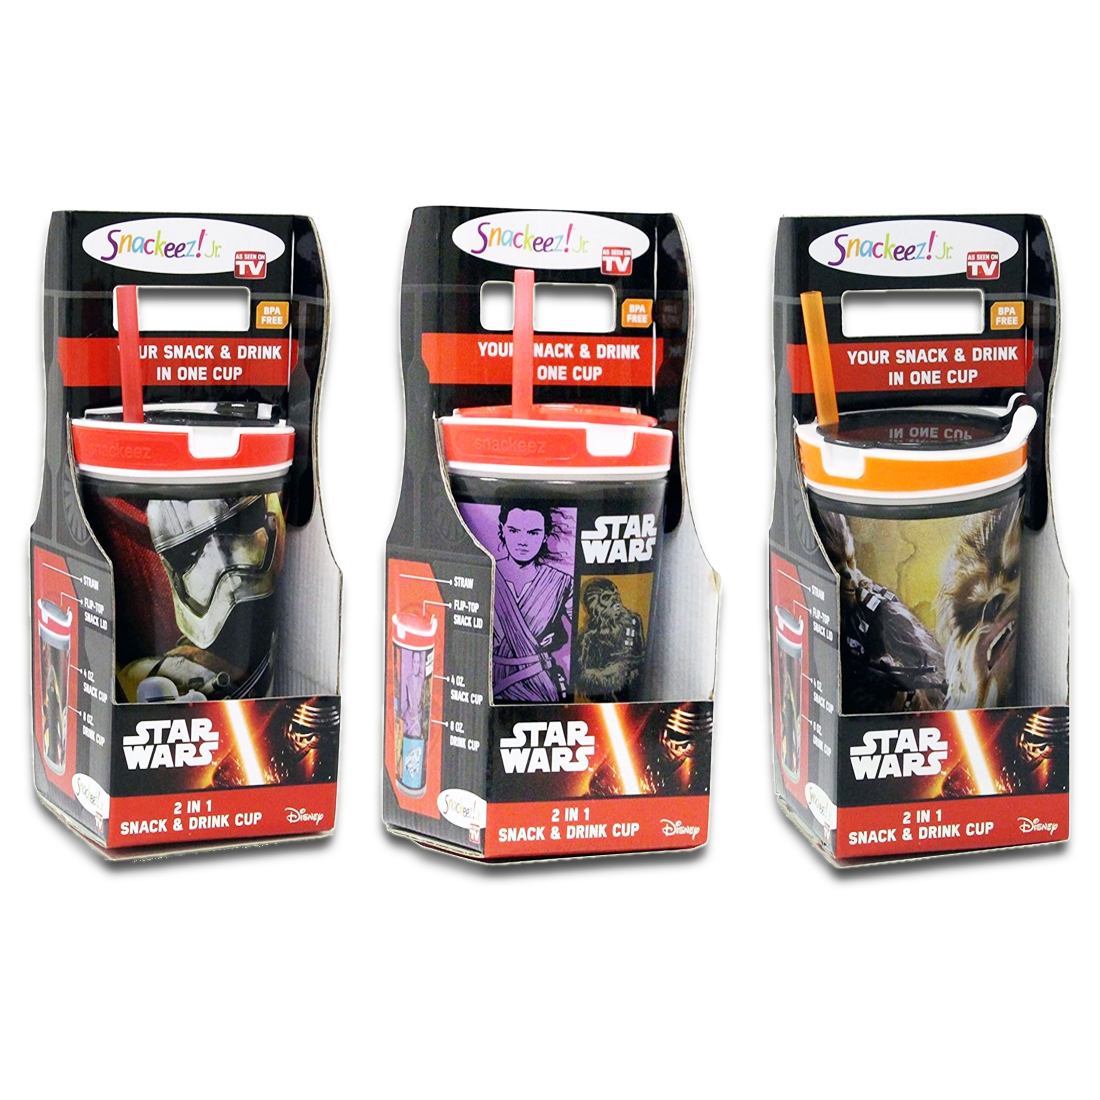 Snackeez Jr 2-in-1 Snack & Drink Cup Star Wars 7 Movie Complete Collection